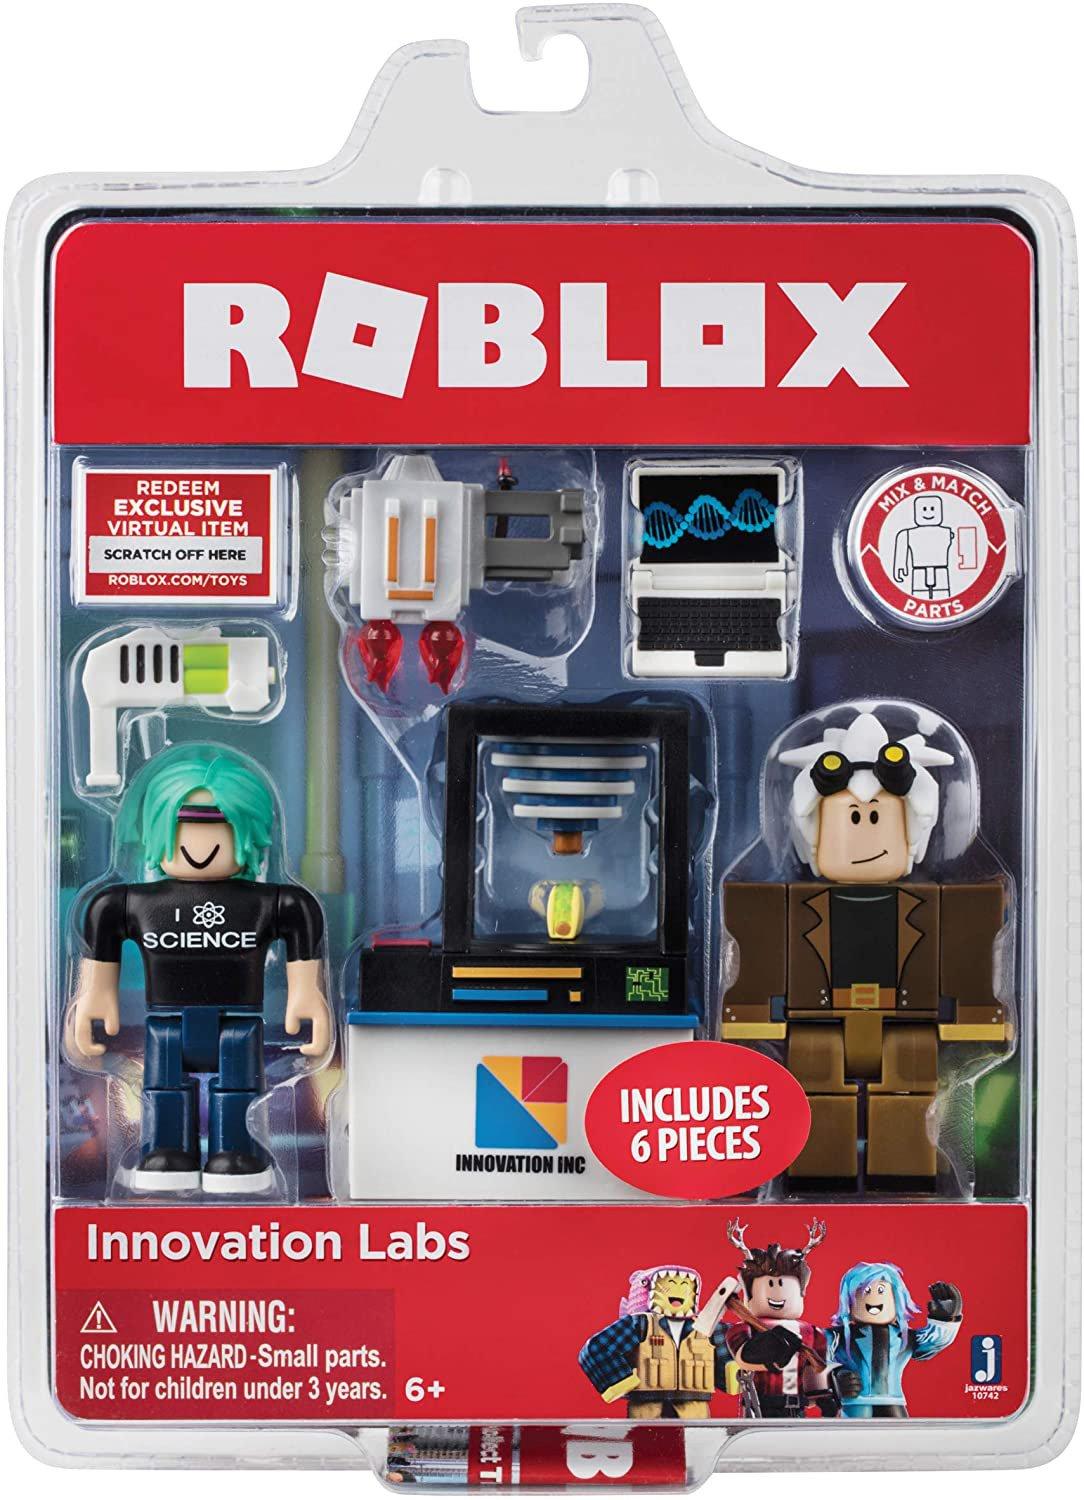 Roblox Toys Value